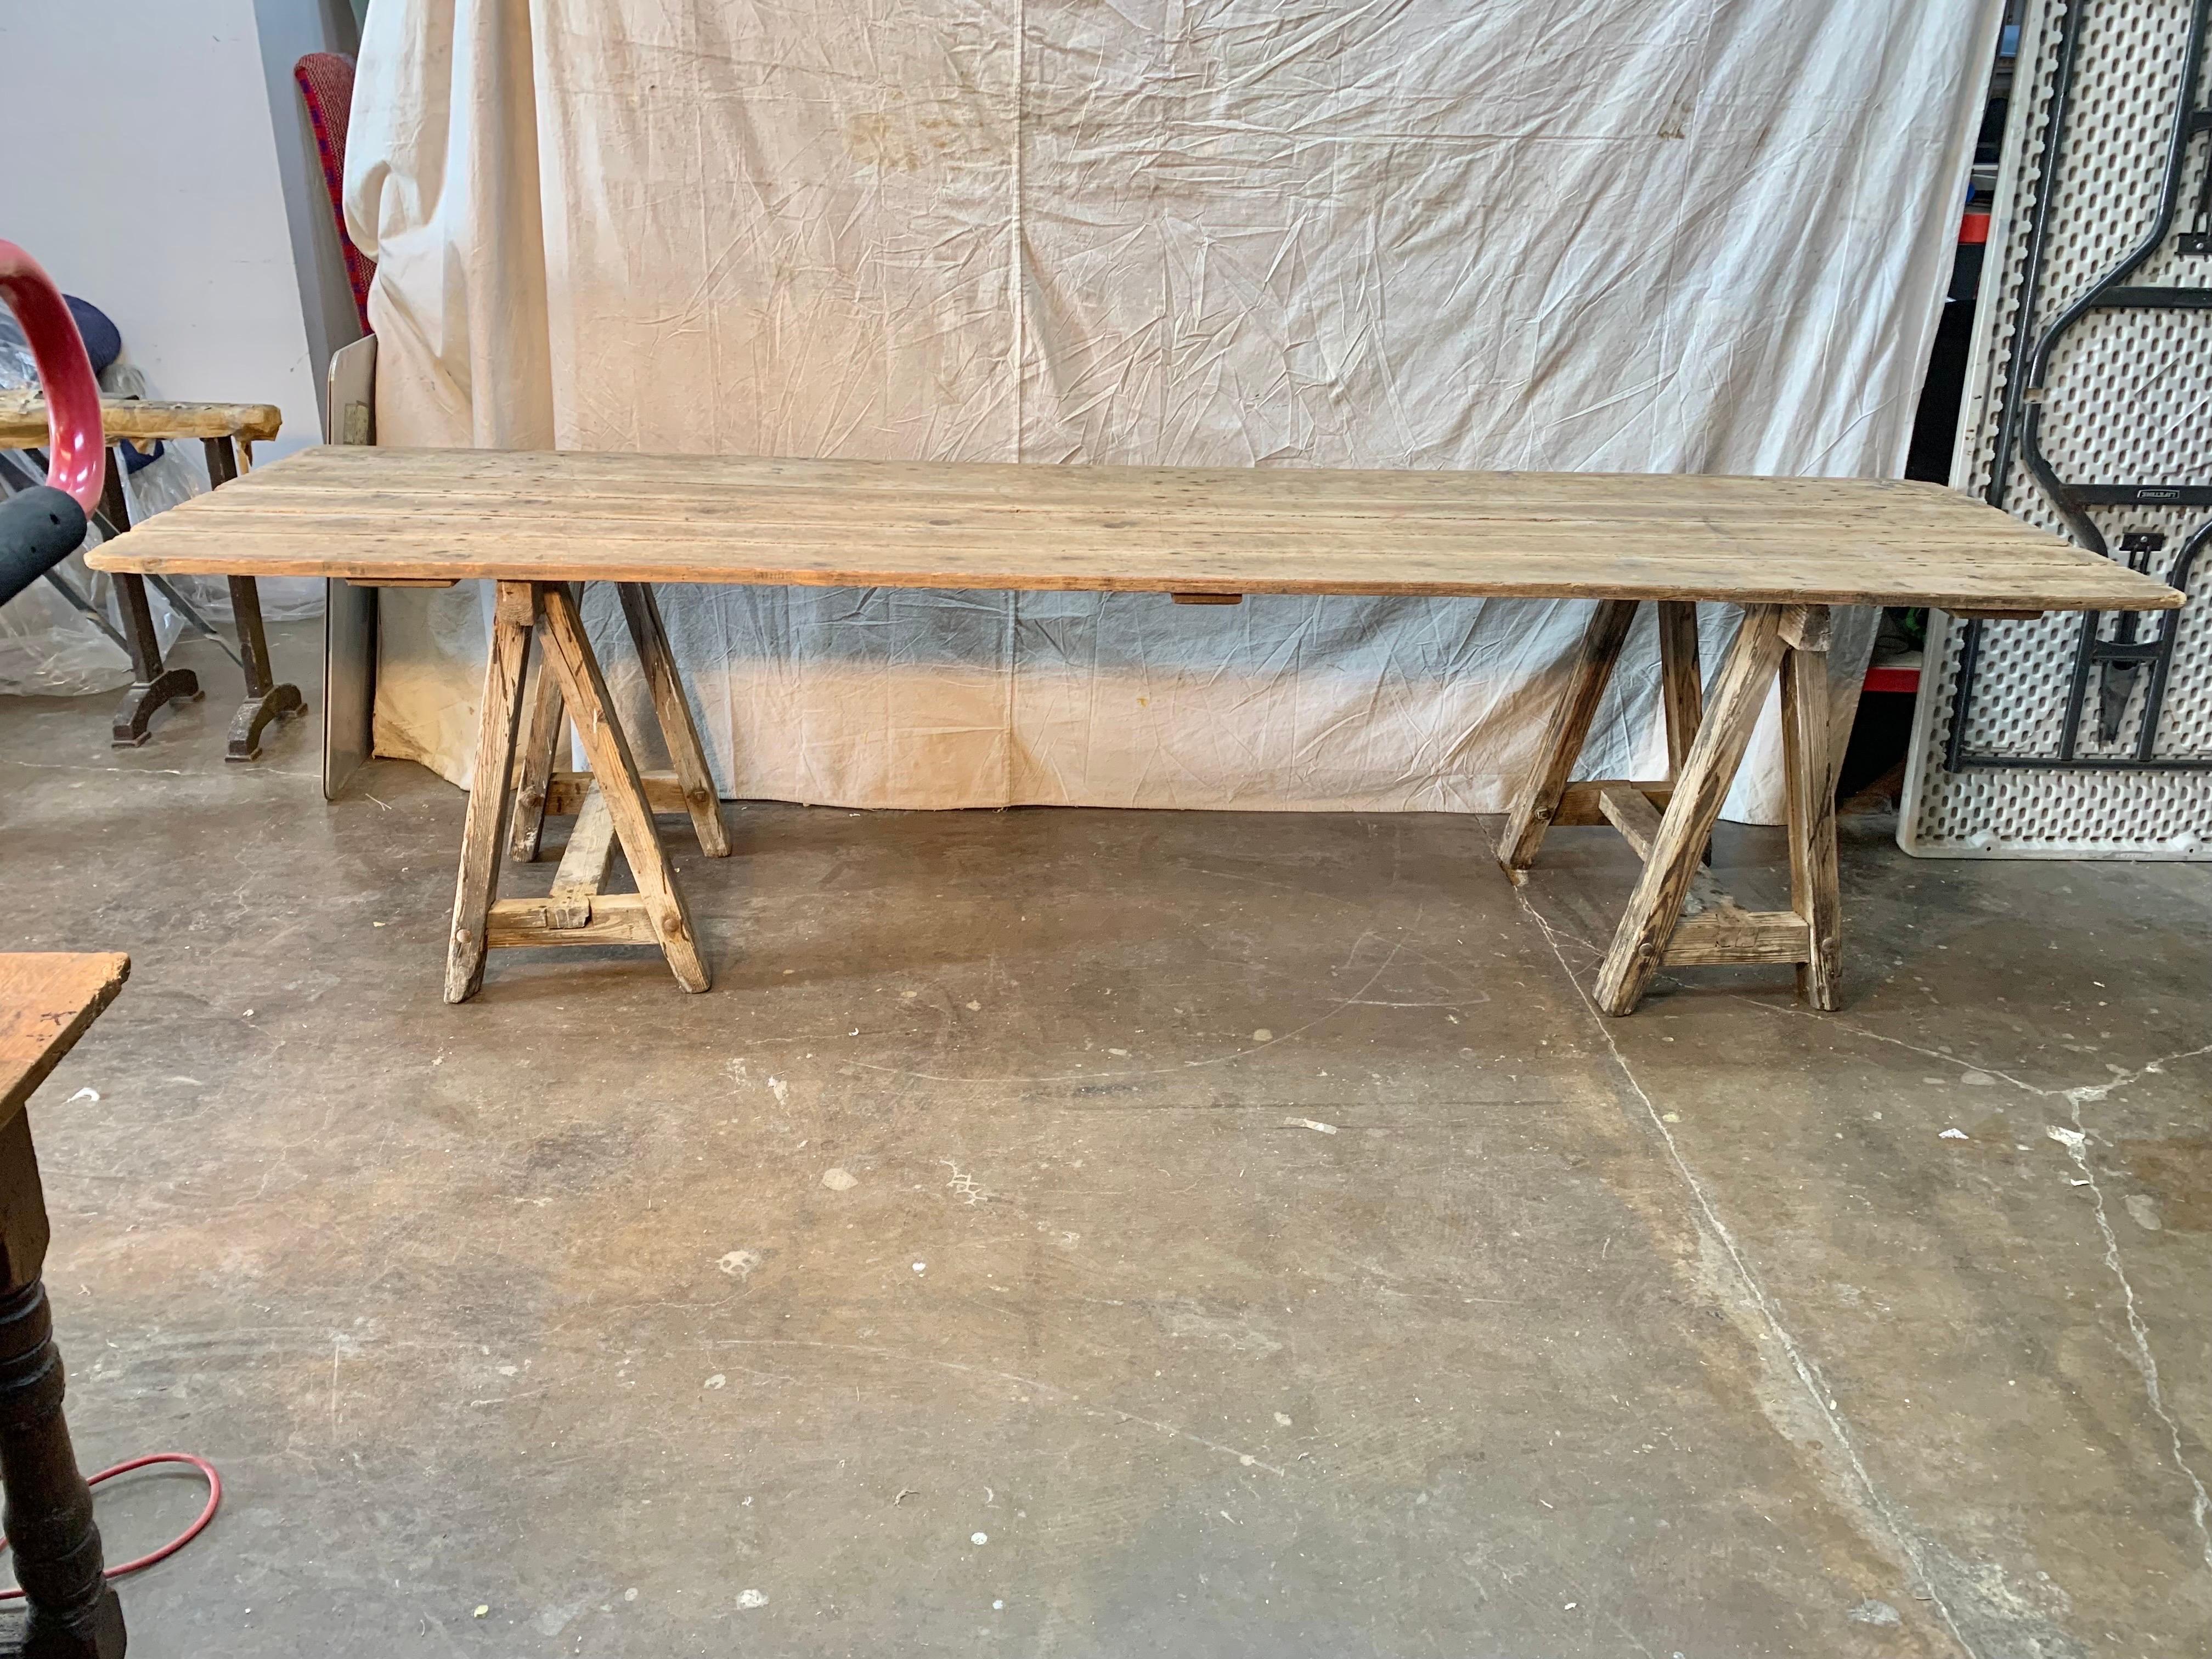 Found in the Burgundy region of France this Early 20th Century French Pine Vineyard Harvest Table is perfect for indoor or outdoor use. Monumental in size the table is just shy of 10 feet in length and has a weathered finish with a beautiful rustic